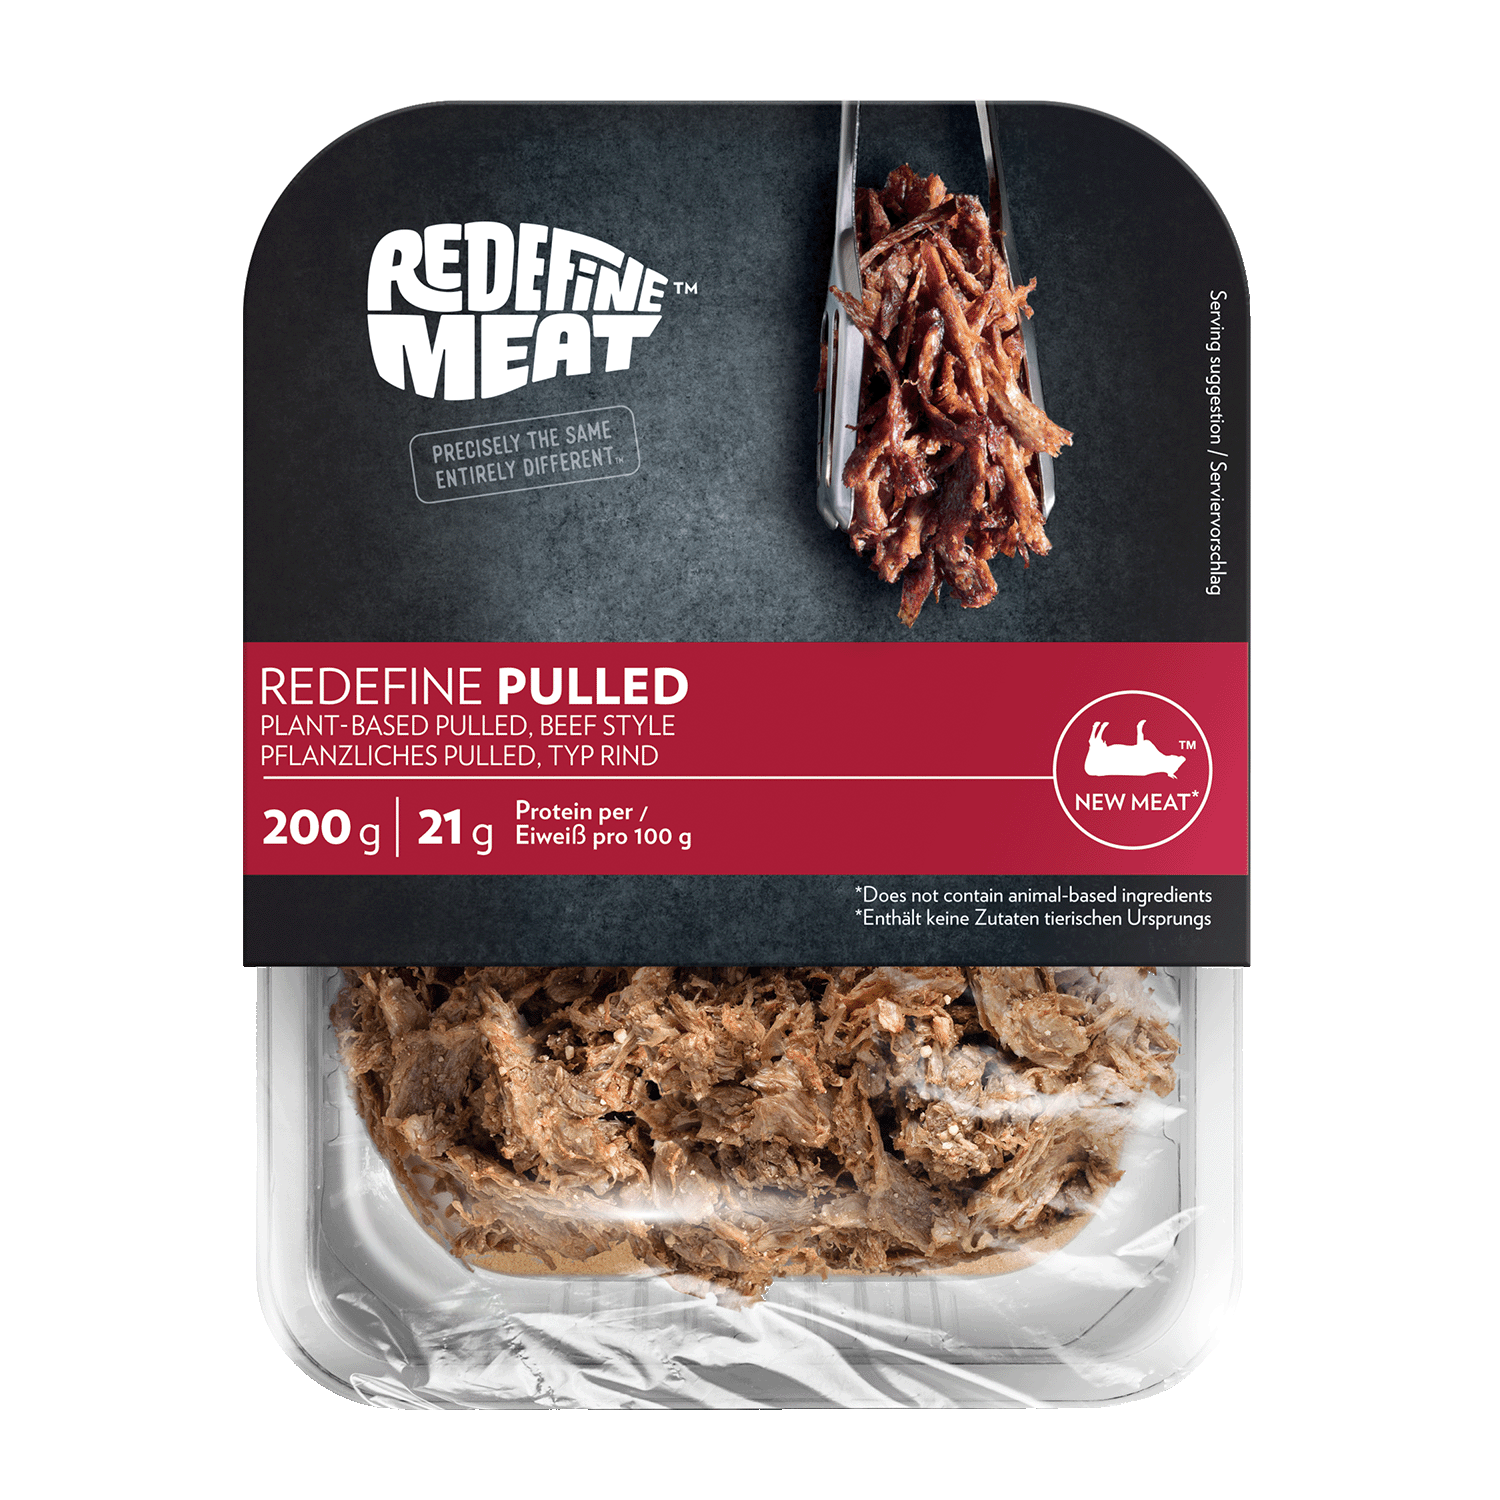 Pulled Beef Style, 200g